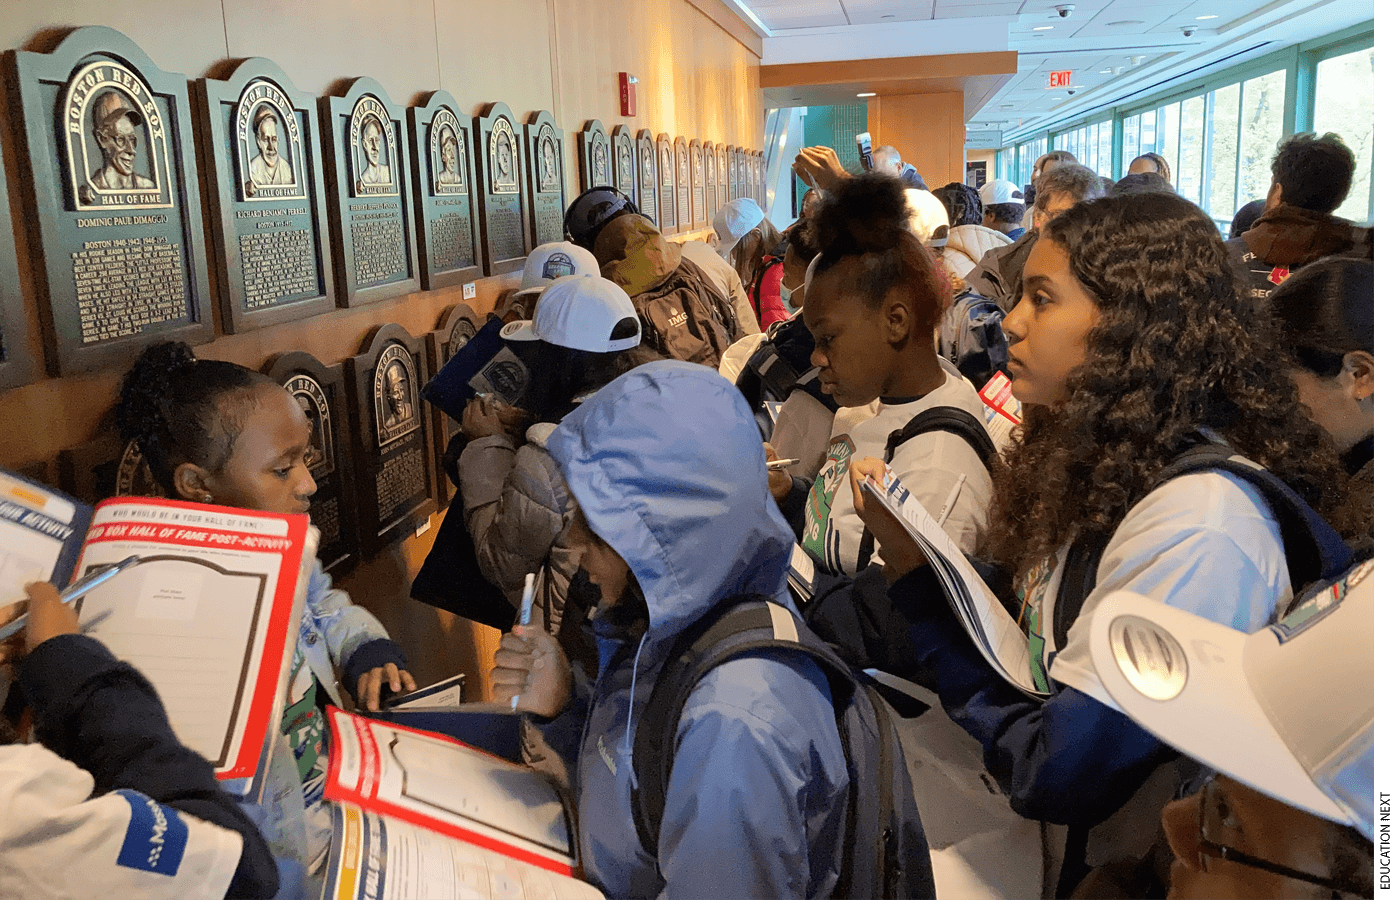 Students from the 6th grade at Nathan Hale School complete a "bingo challenge" as part of the Red Sox Hall of Fame stop on their guided tour of the Fenway Park Learning Lab.